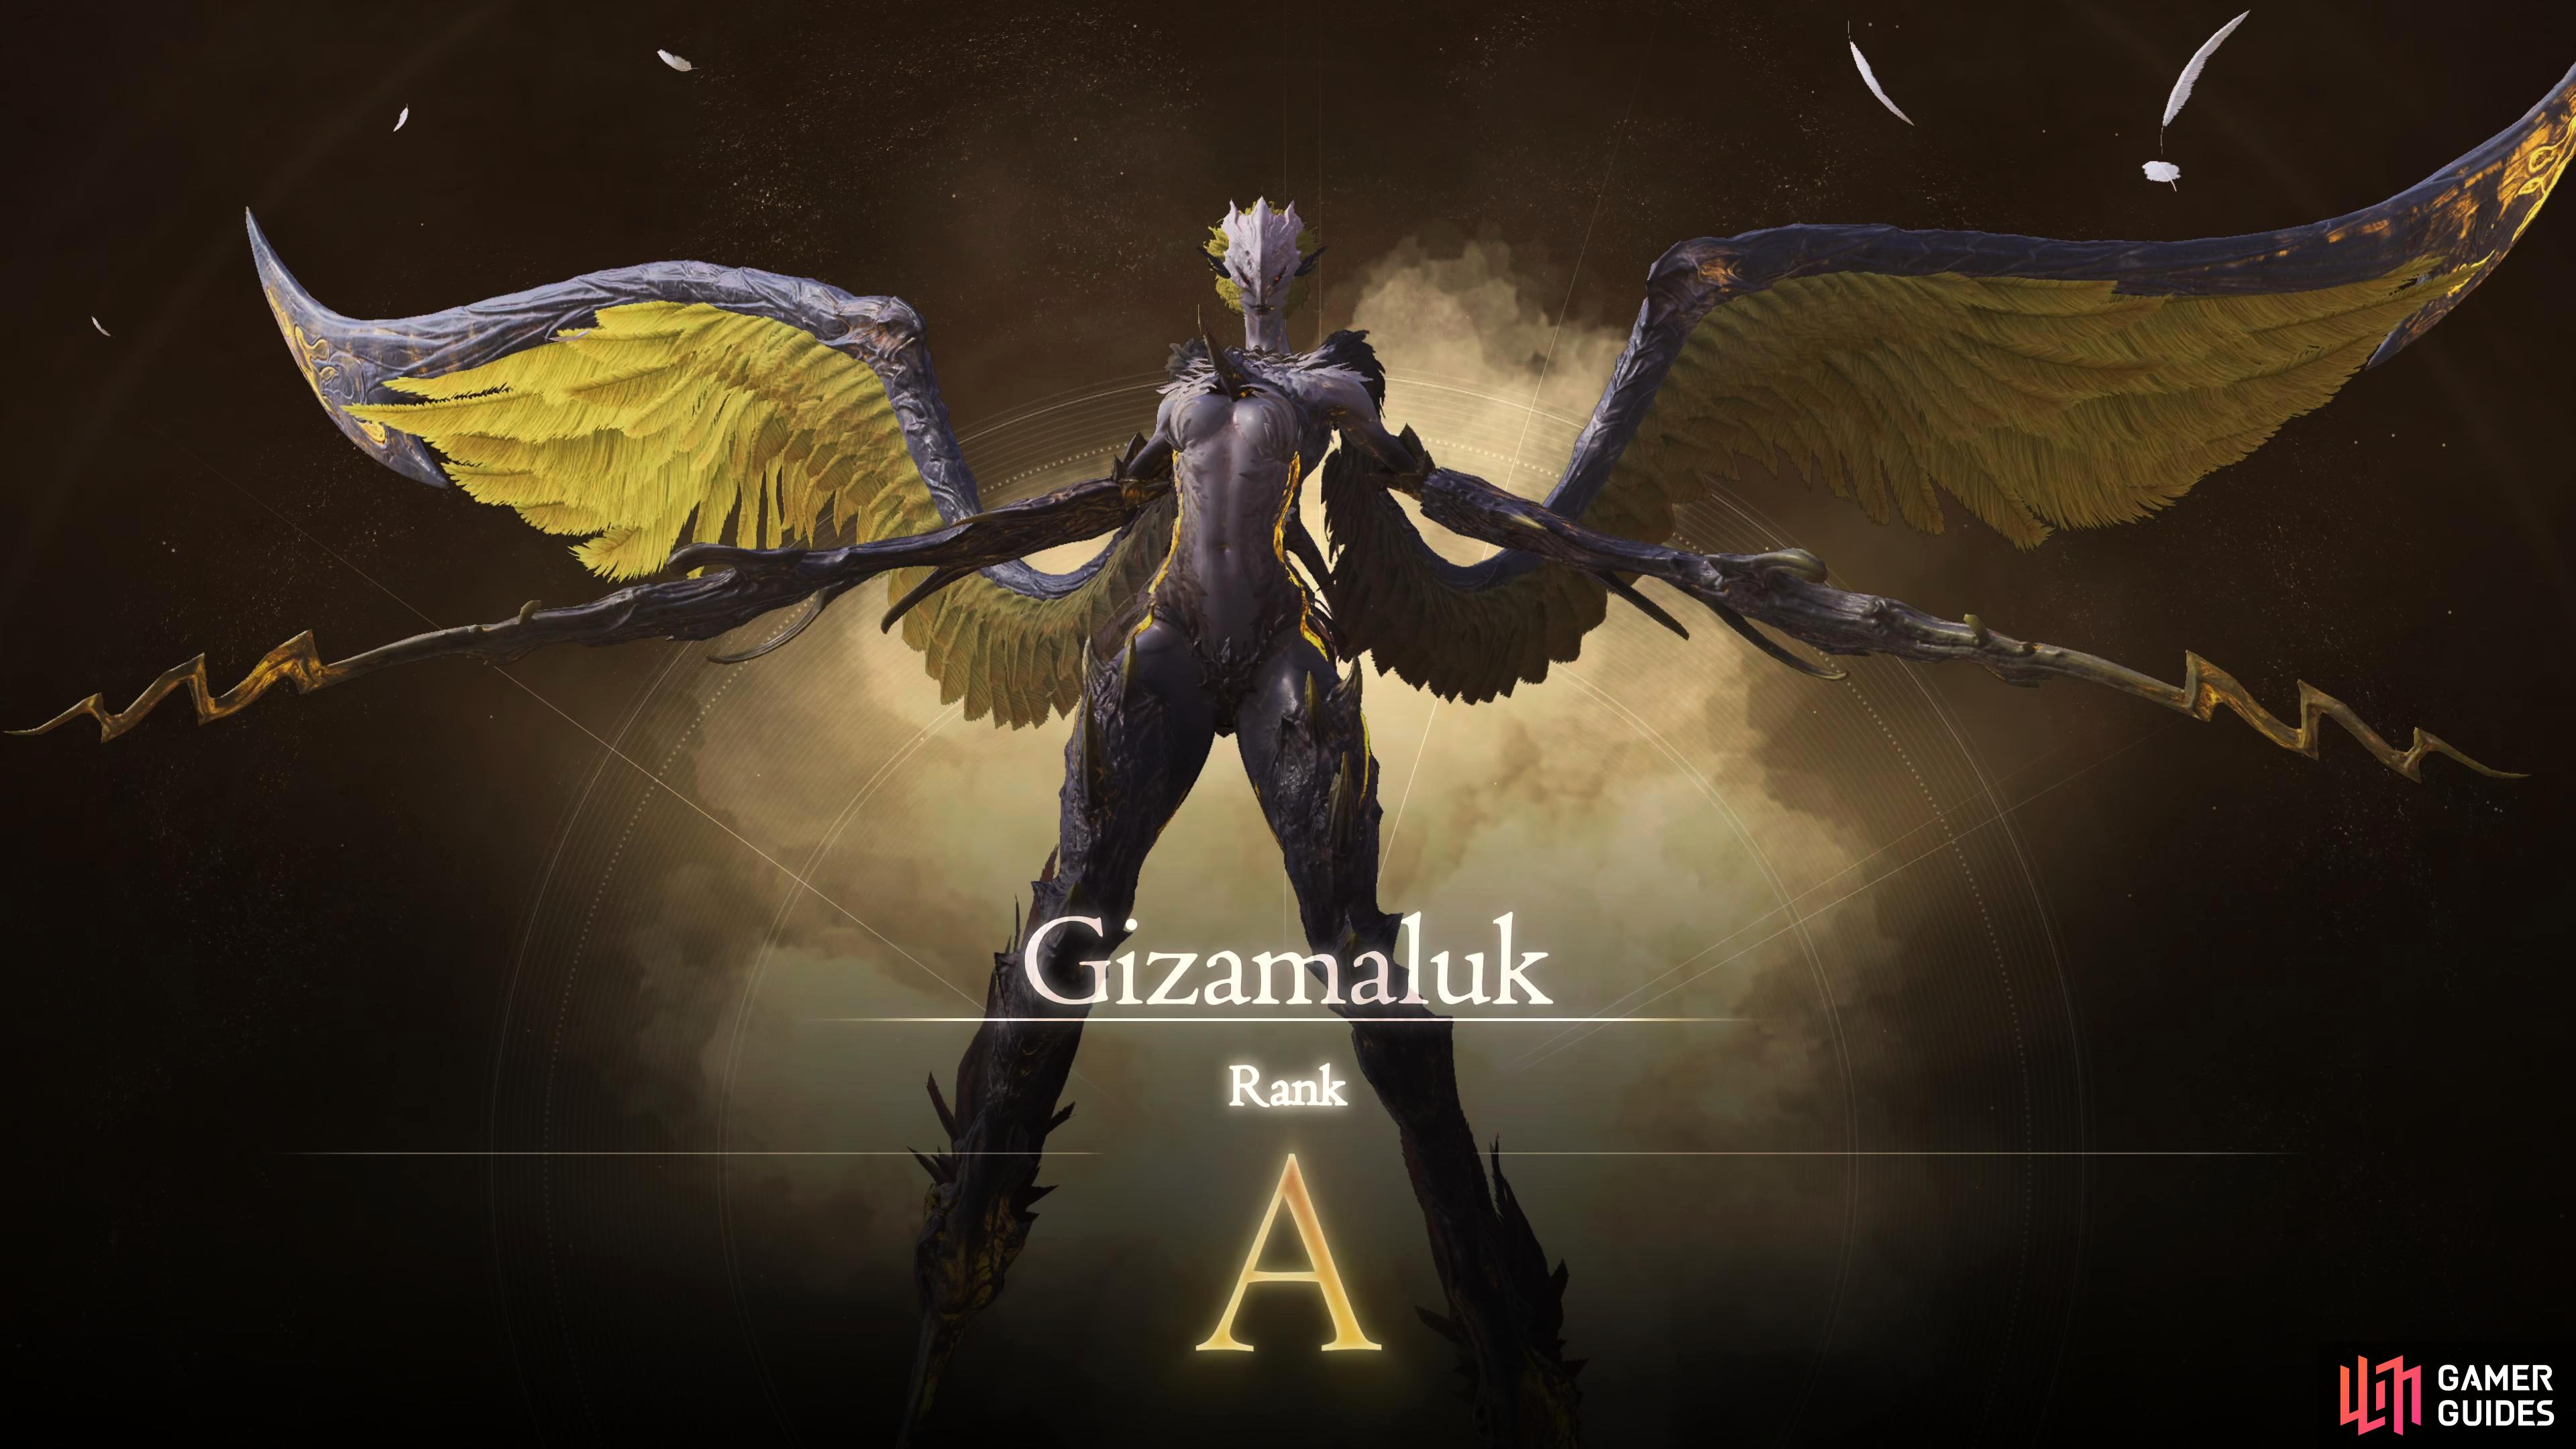 The Wailing Banshee, Gizamaluk is an A-Rank Notorious Mark which can be accessed during the last main story quest.